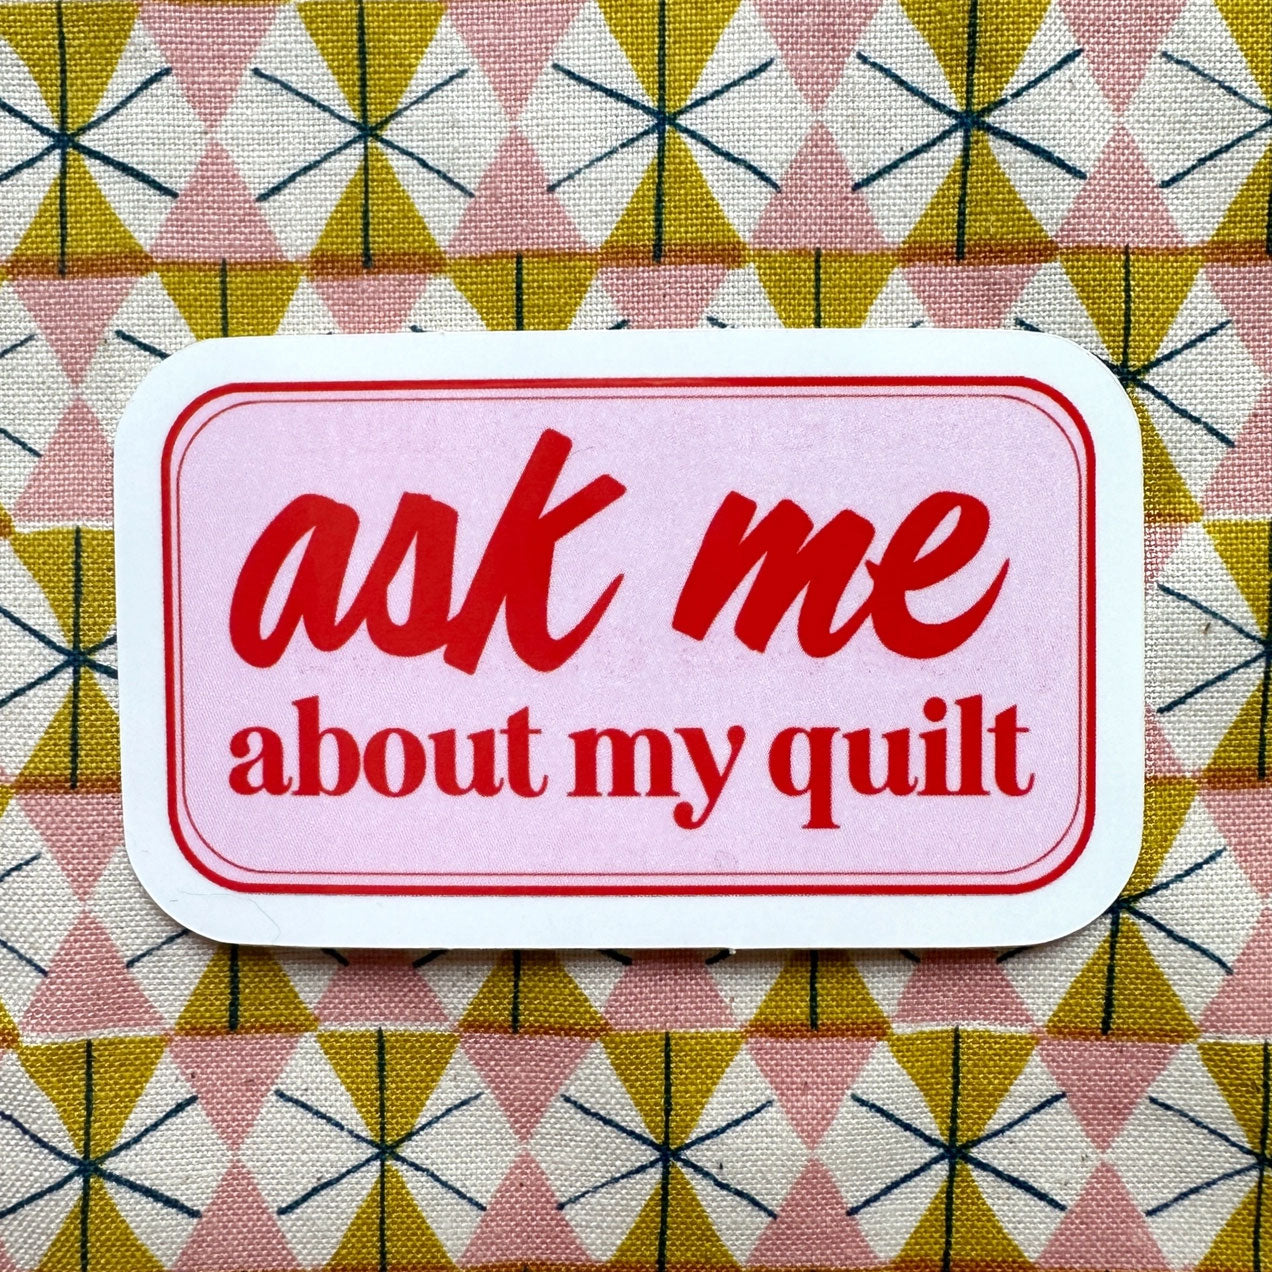 Ask Me About My Quilt ✿ Sticker ✿ Whipstitch Handmade